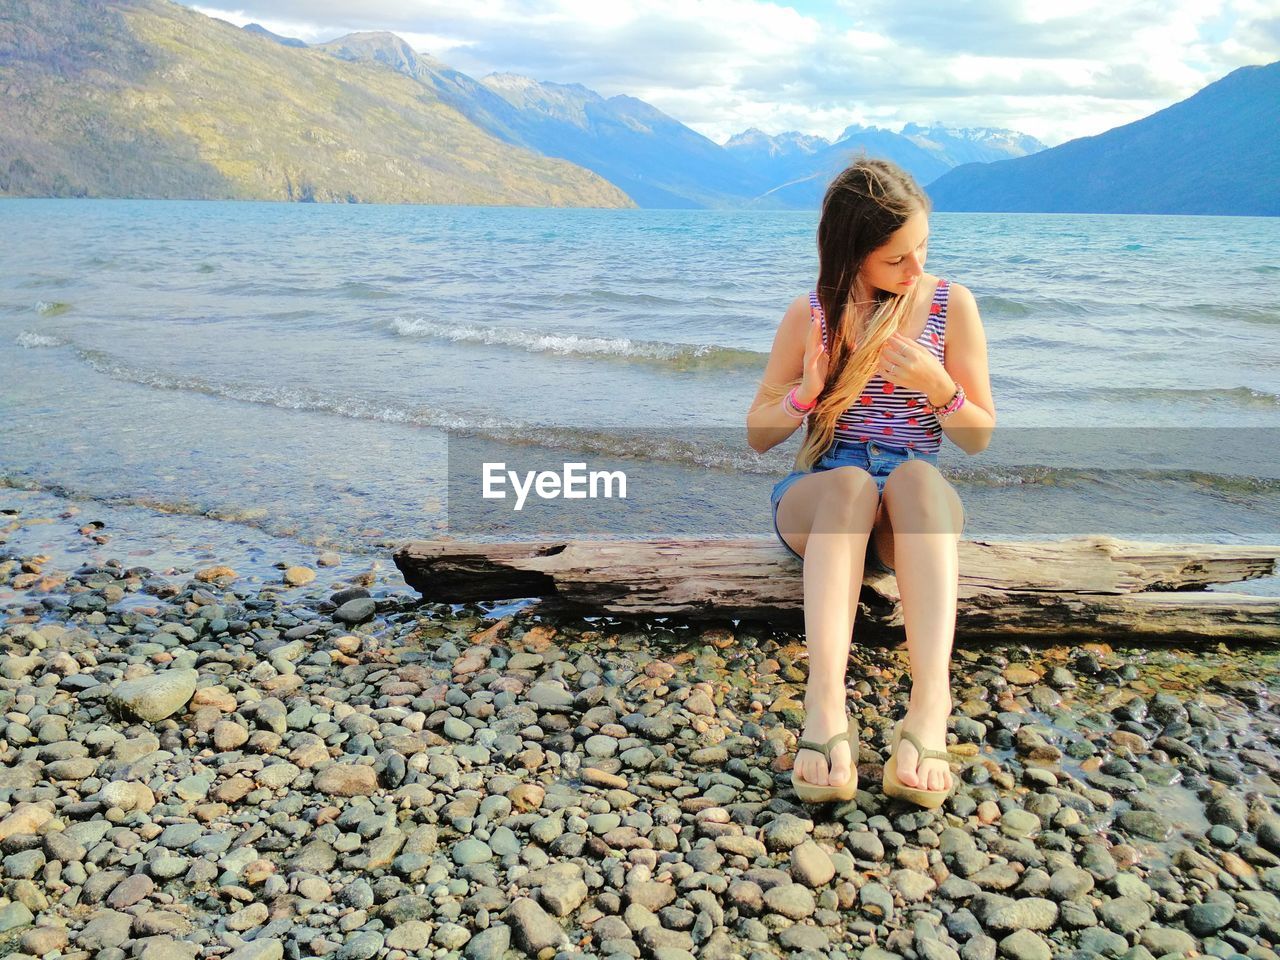 Full length of young woman sitting on pebbles at beach